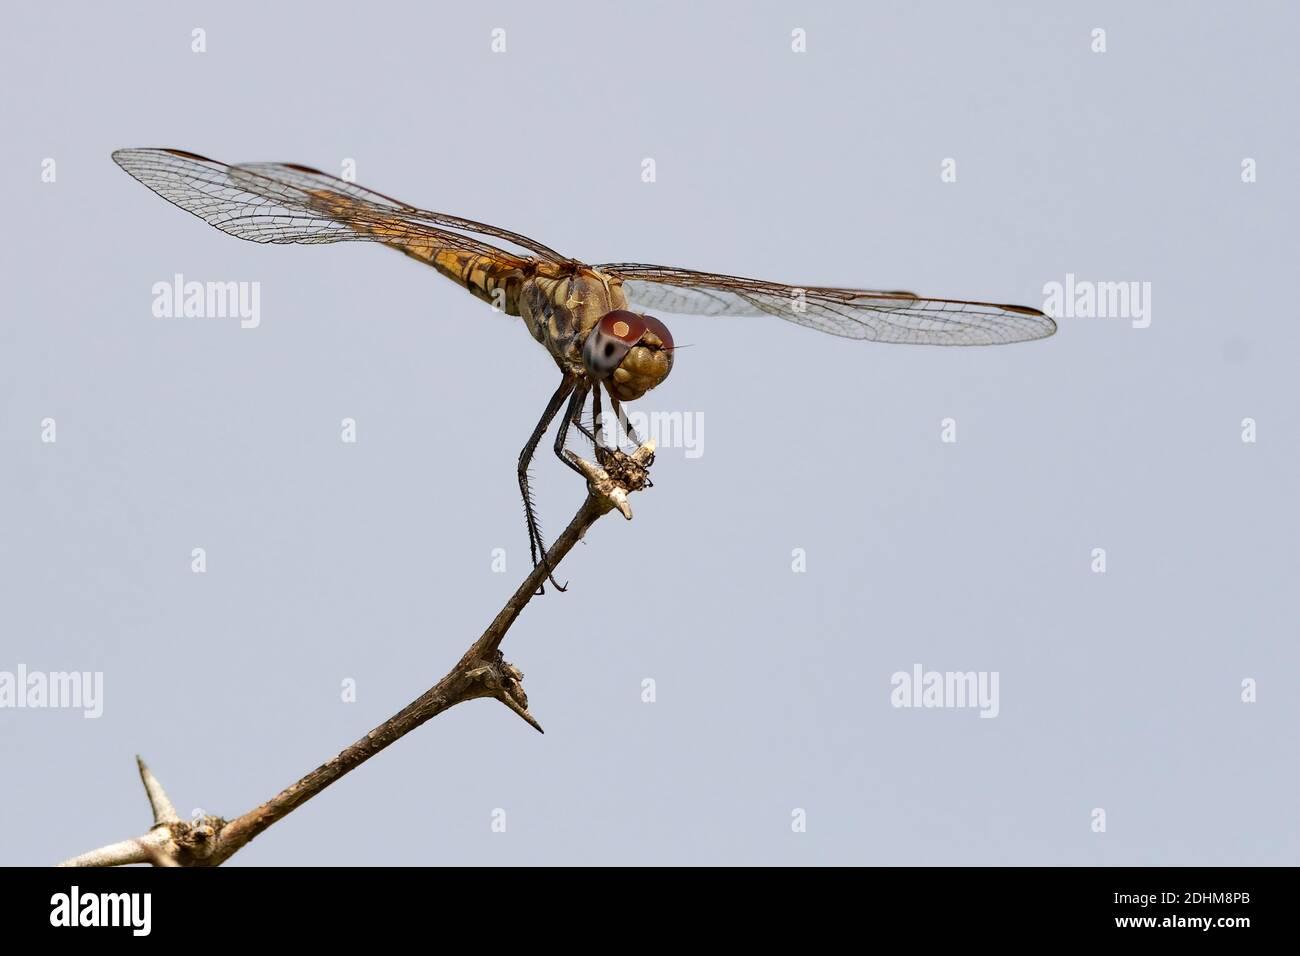 Probably an immature red-veined dropwing (Trithemis arteriosa) from Kruger NP, South Africa. Stock Photo